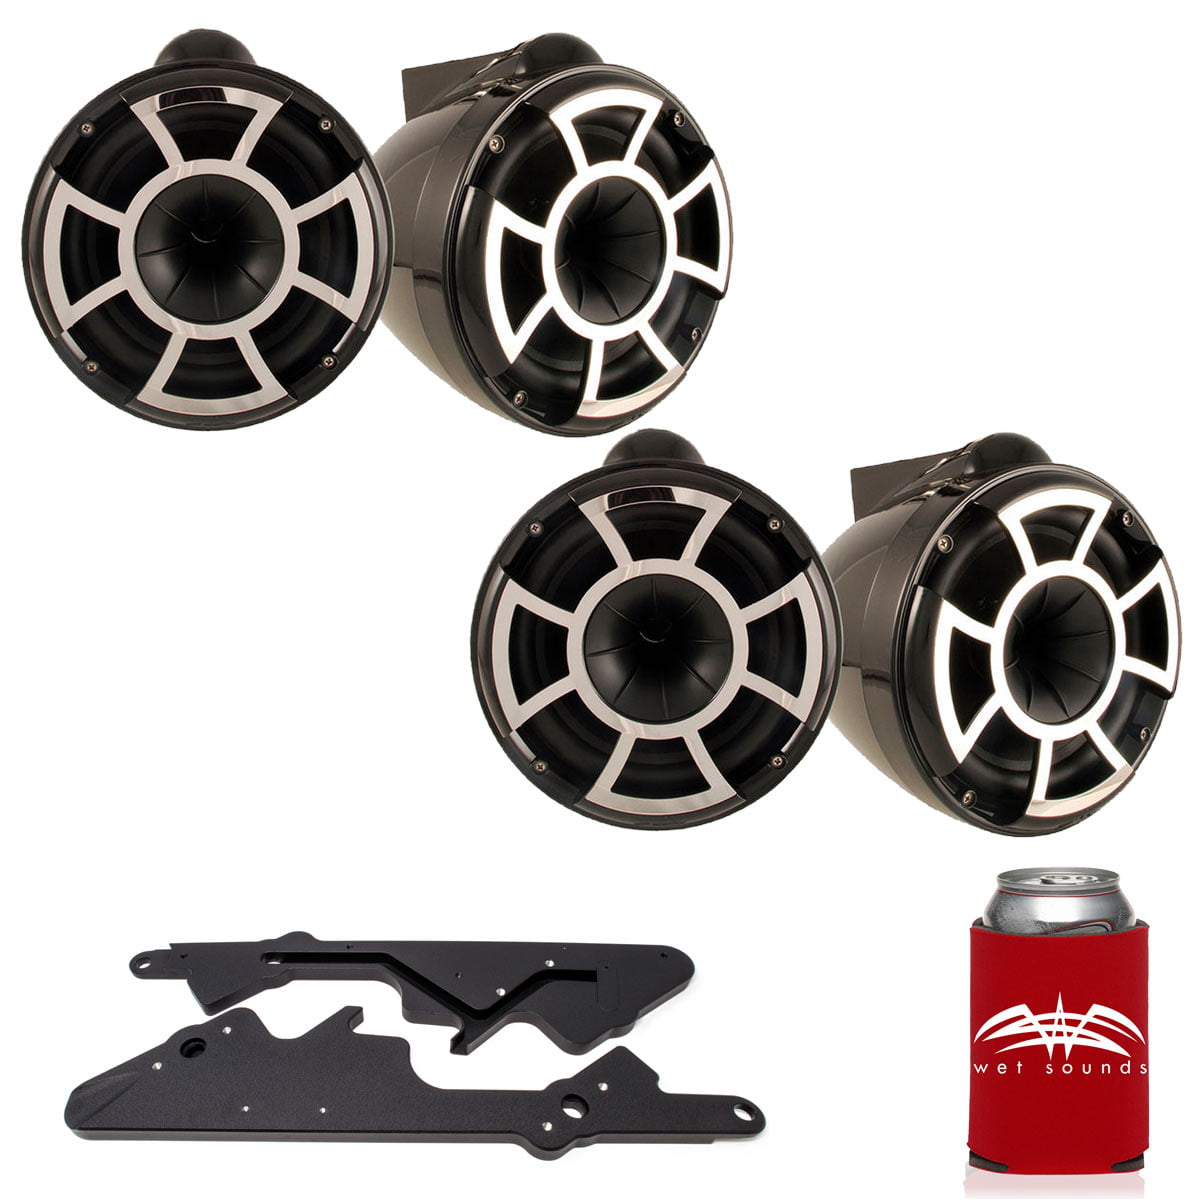 Malibu Illusion X Wakeboard Tower Speaker Can Pods With Mounts-Polished or Black 